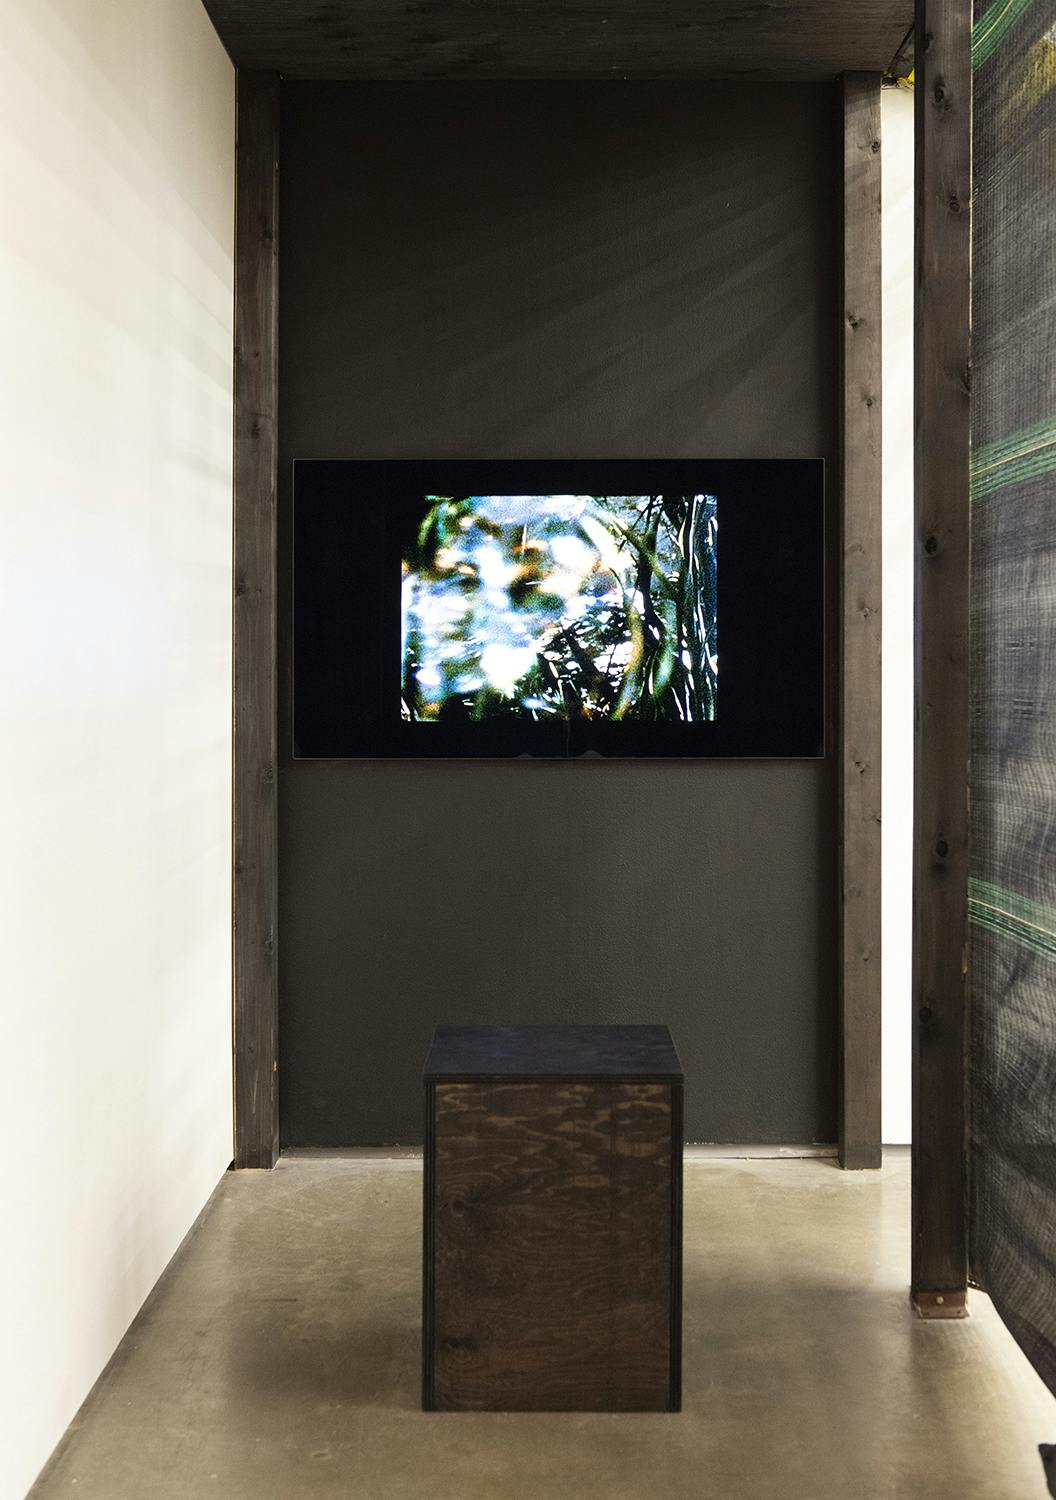 A small narrow space with a monitor, mounted on a black wall. On the screen there is an abstract blue and white image. In front there is a box seat made out of dark brown stained wood. 